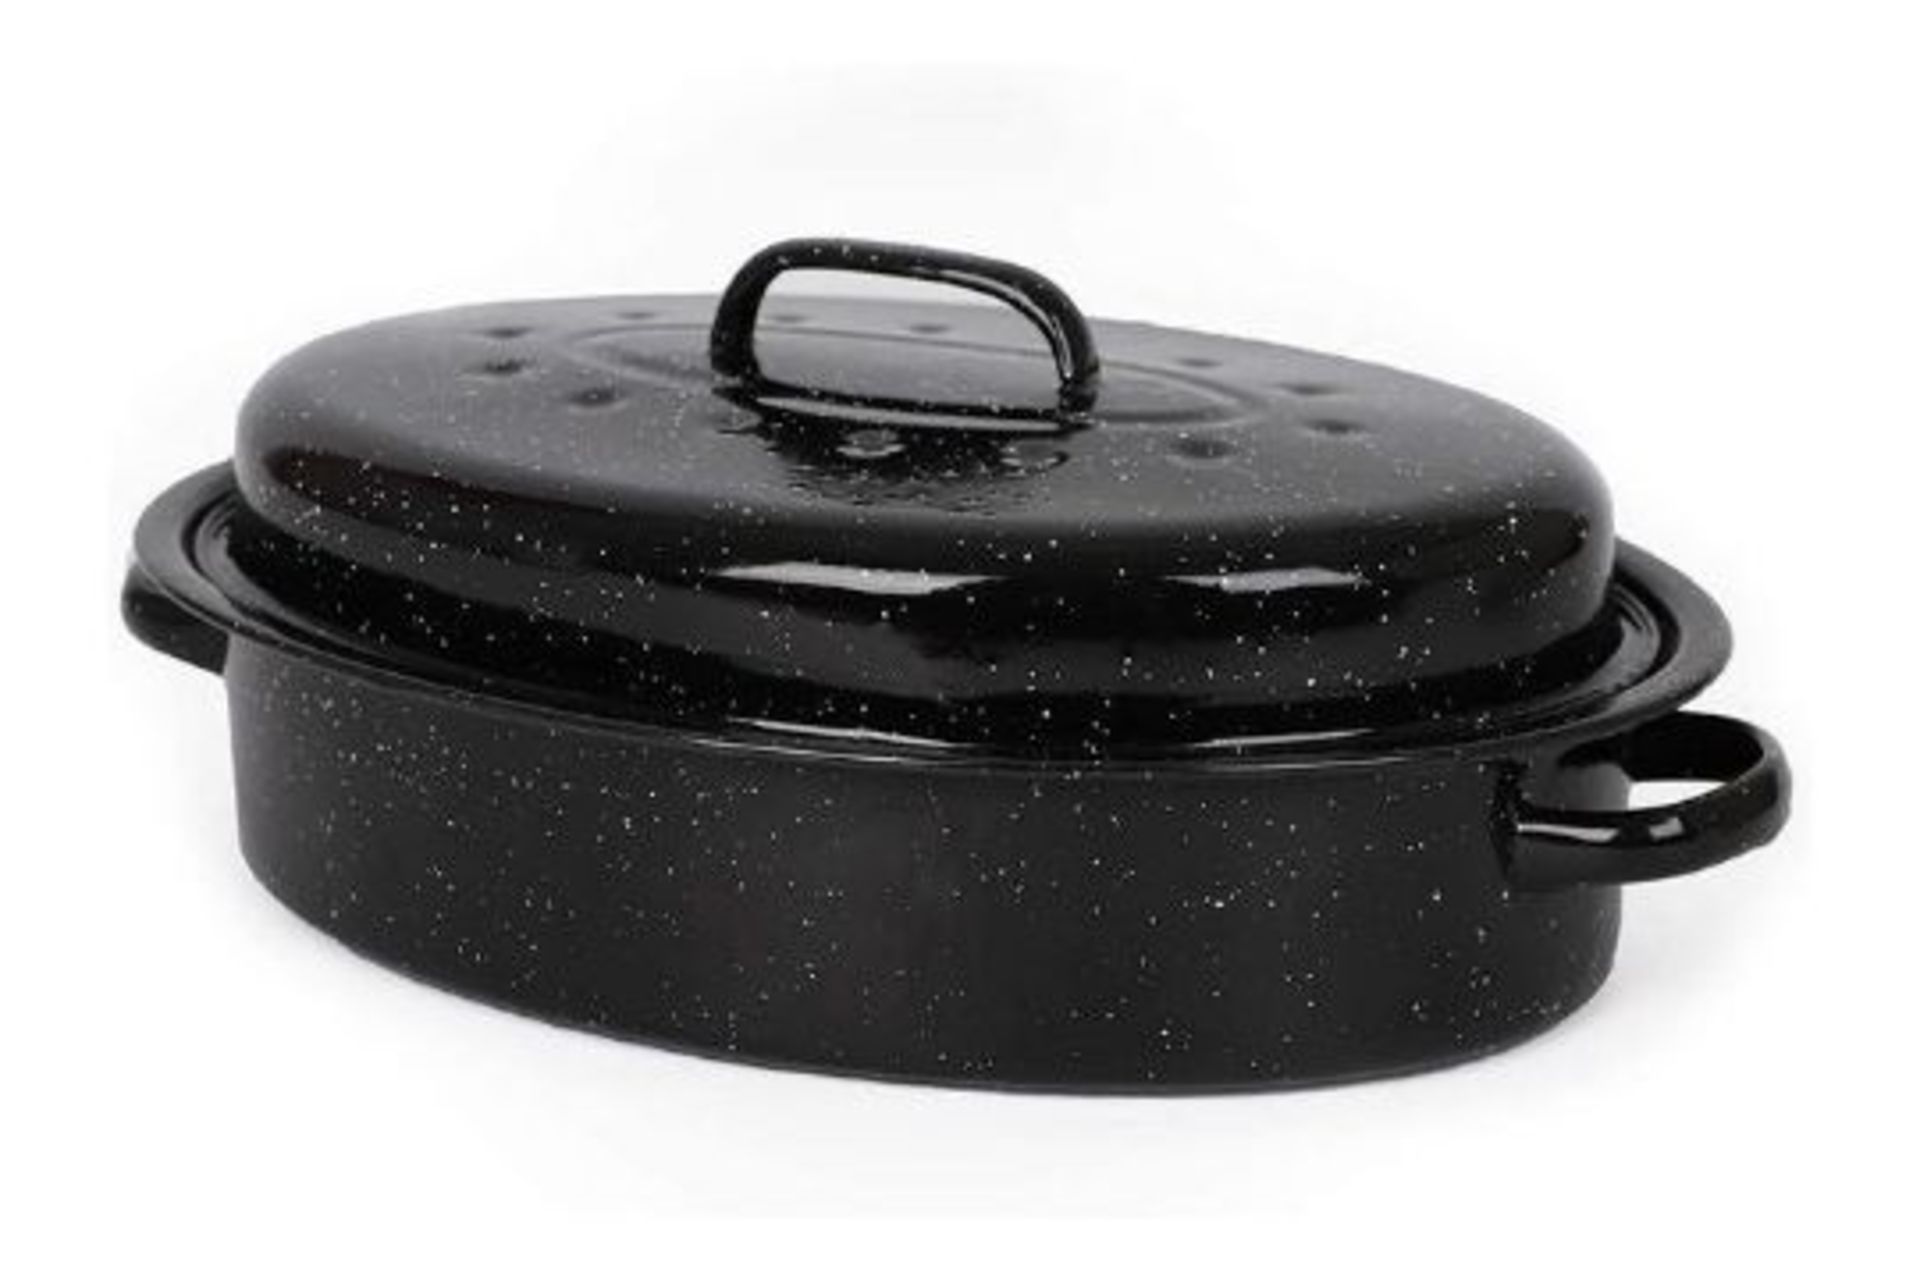 Enamel Self-Basting Roasting Tin With Lid (ER51) The juices will collect in the dimpled lid and